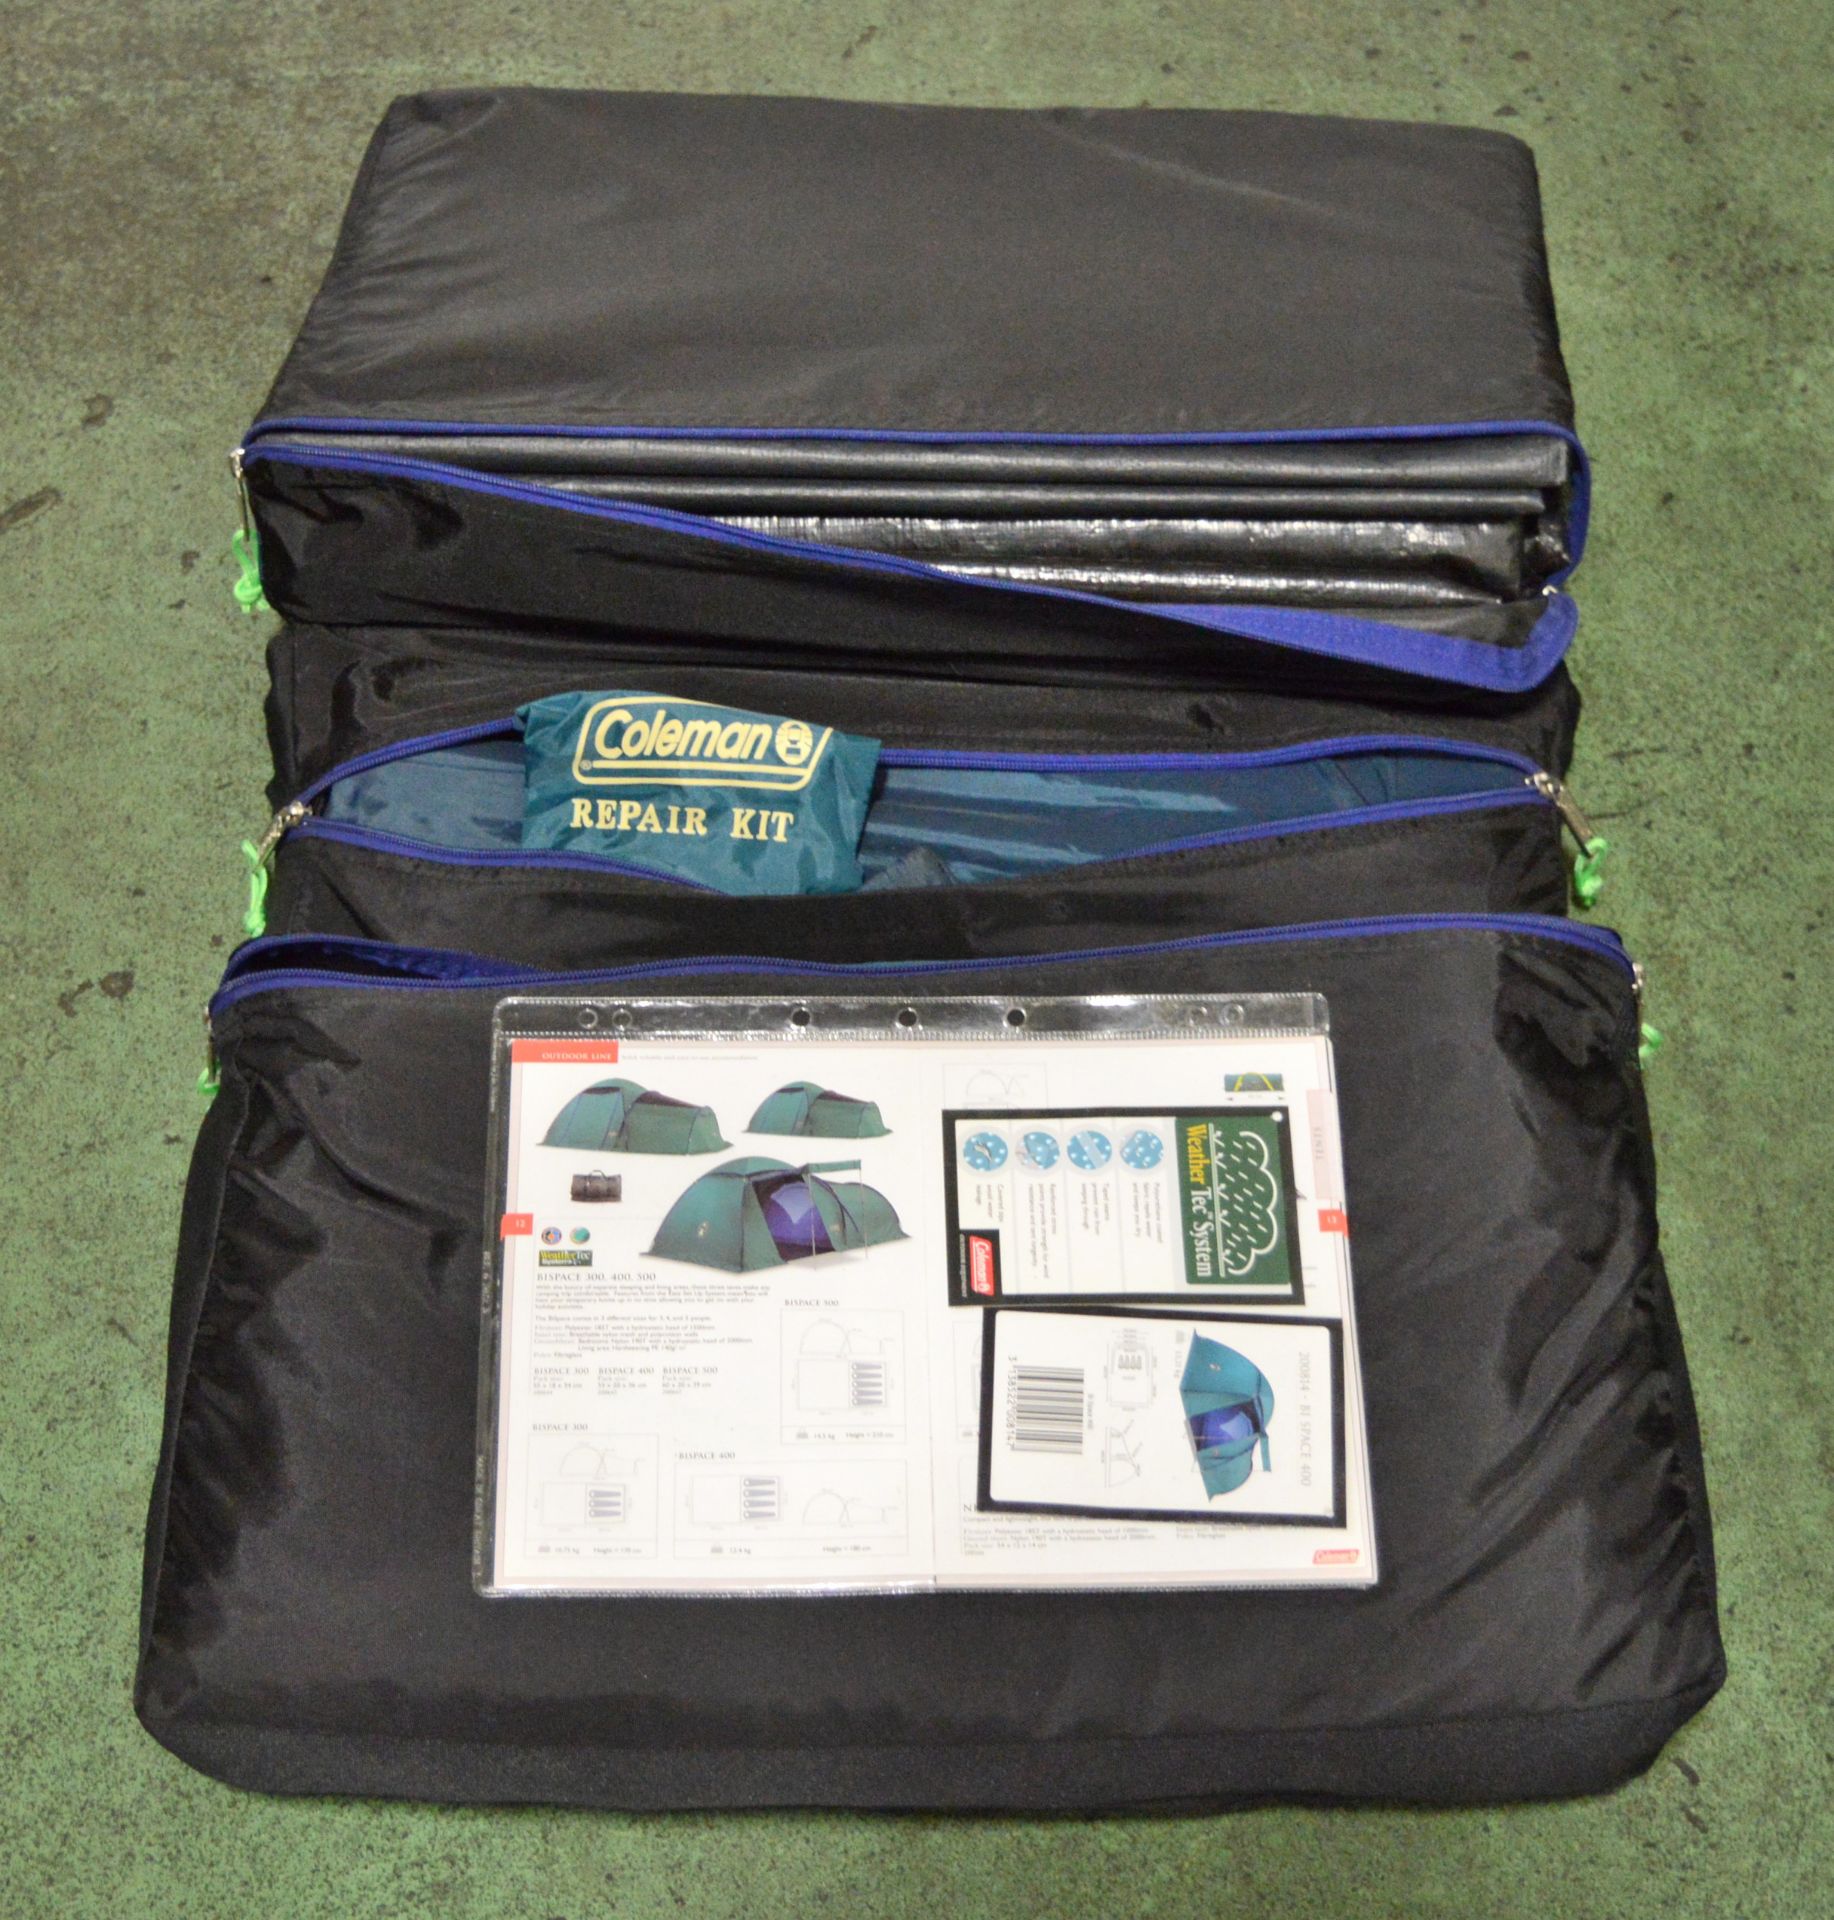 Coleman Bispace 400 4x Person Tent - Compete & in good condition.